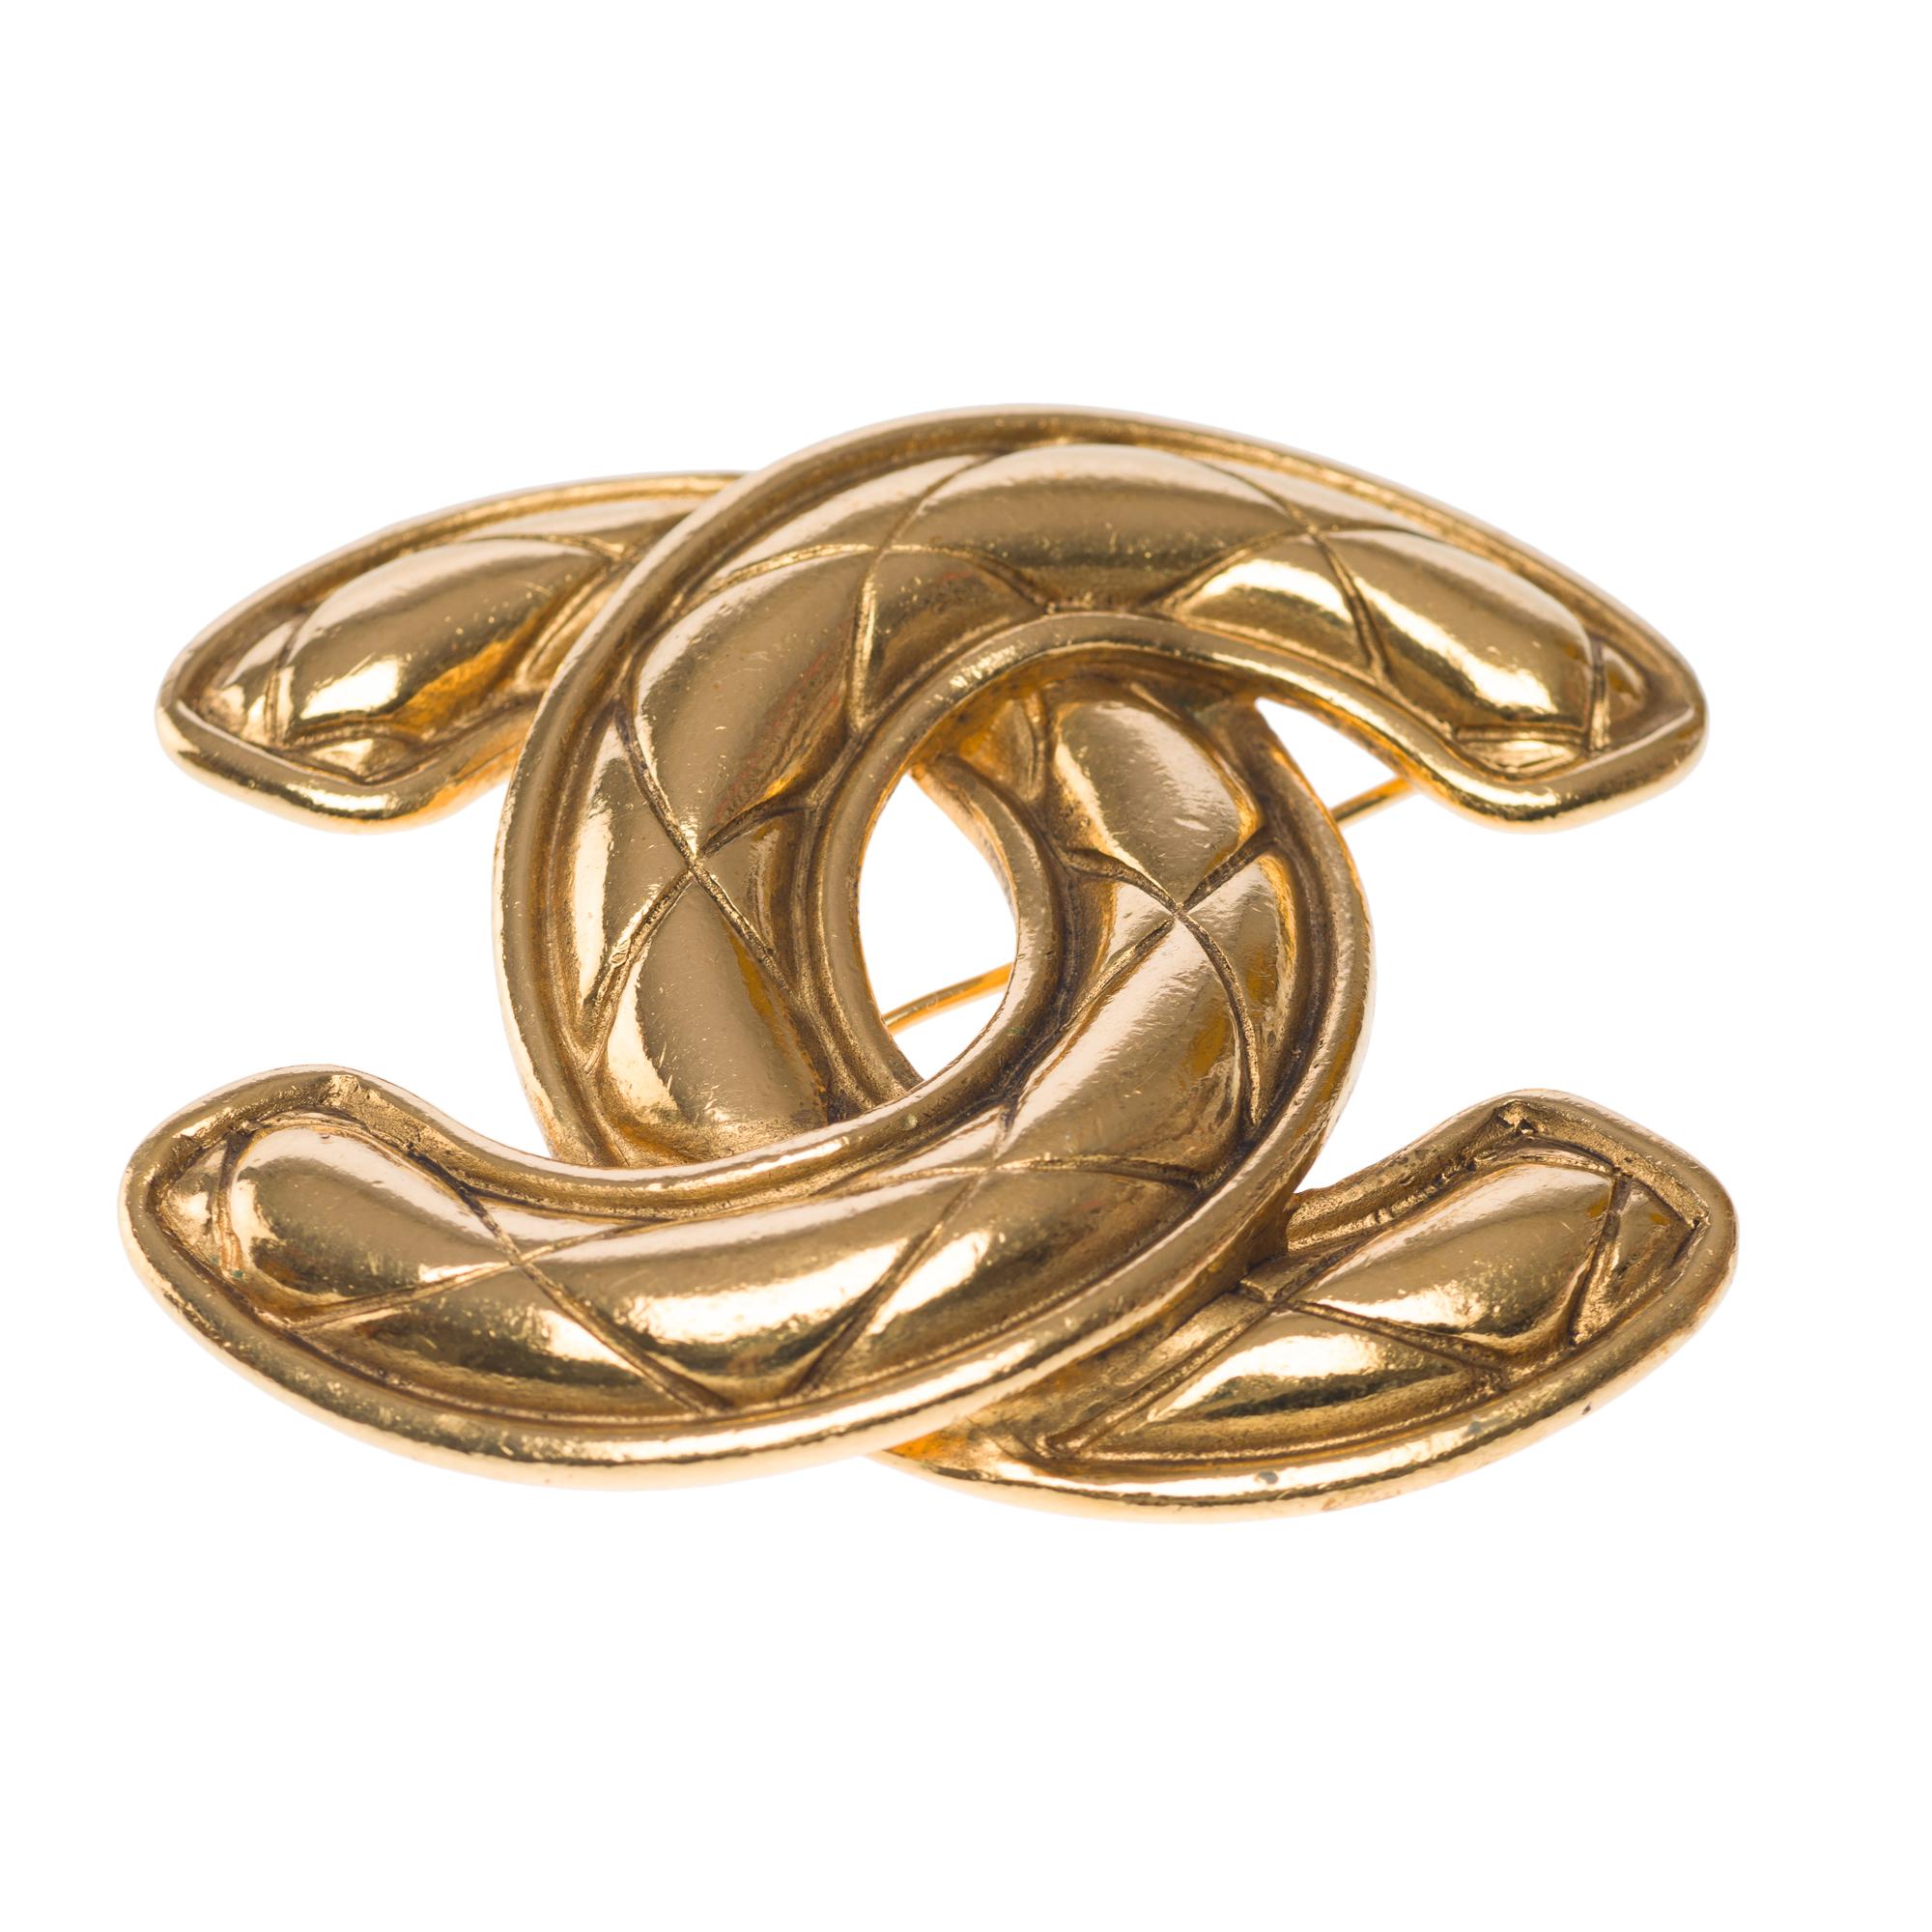 Lovely​ ​CHANEL​ ​Brooch​ ​quilted​ ​diamond​ ​logo​ ​CC​ ​gold​ ​plated​ ​metal
Pin​ ​clasp
Signature:​ ​